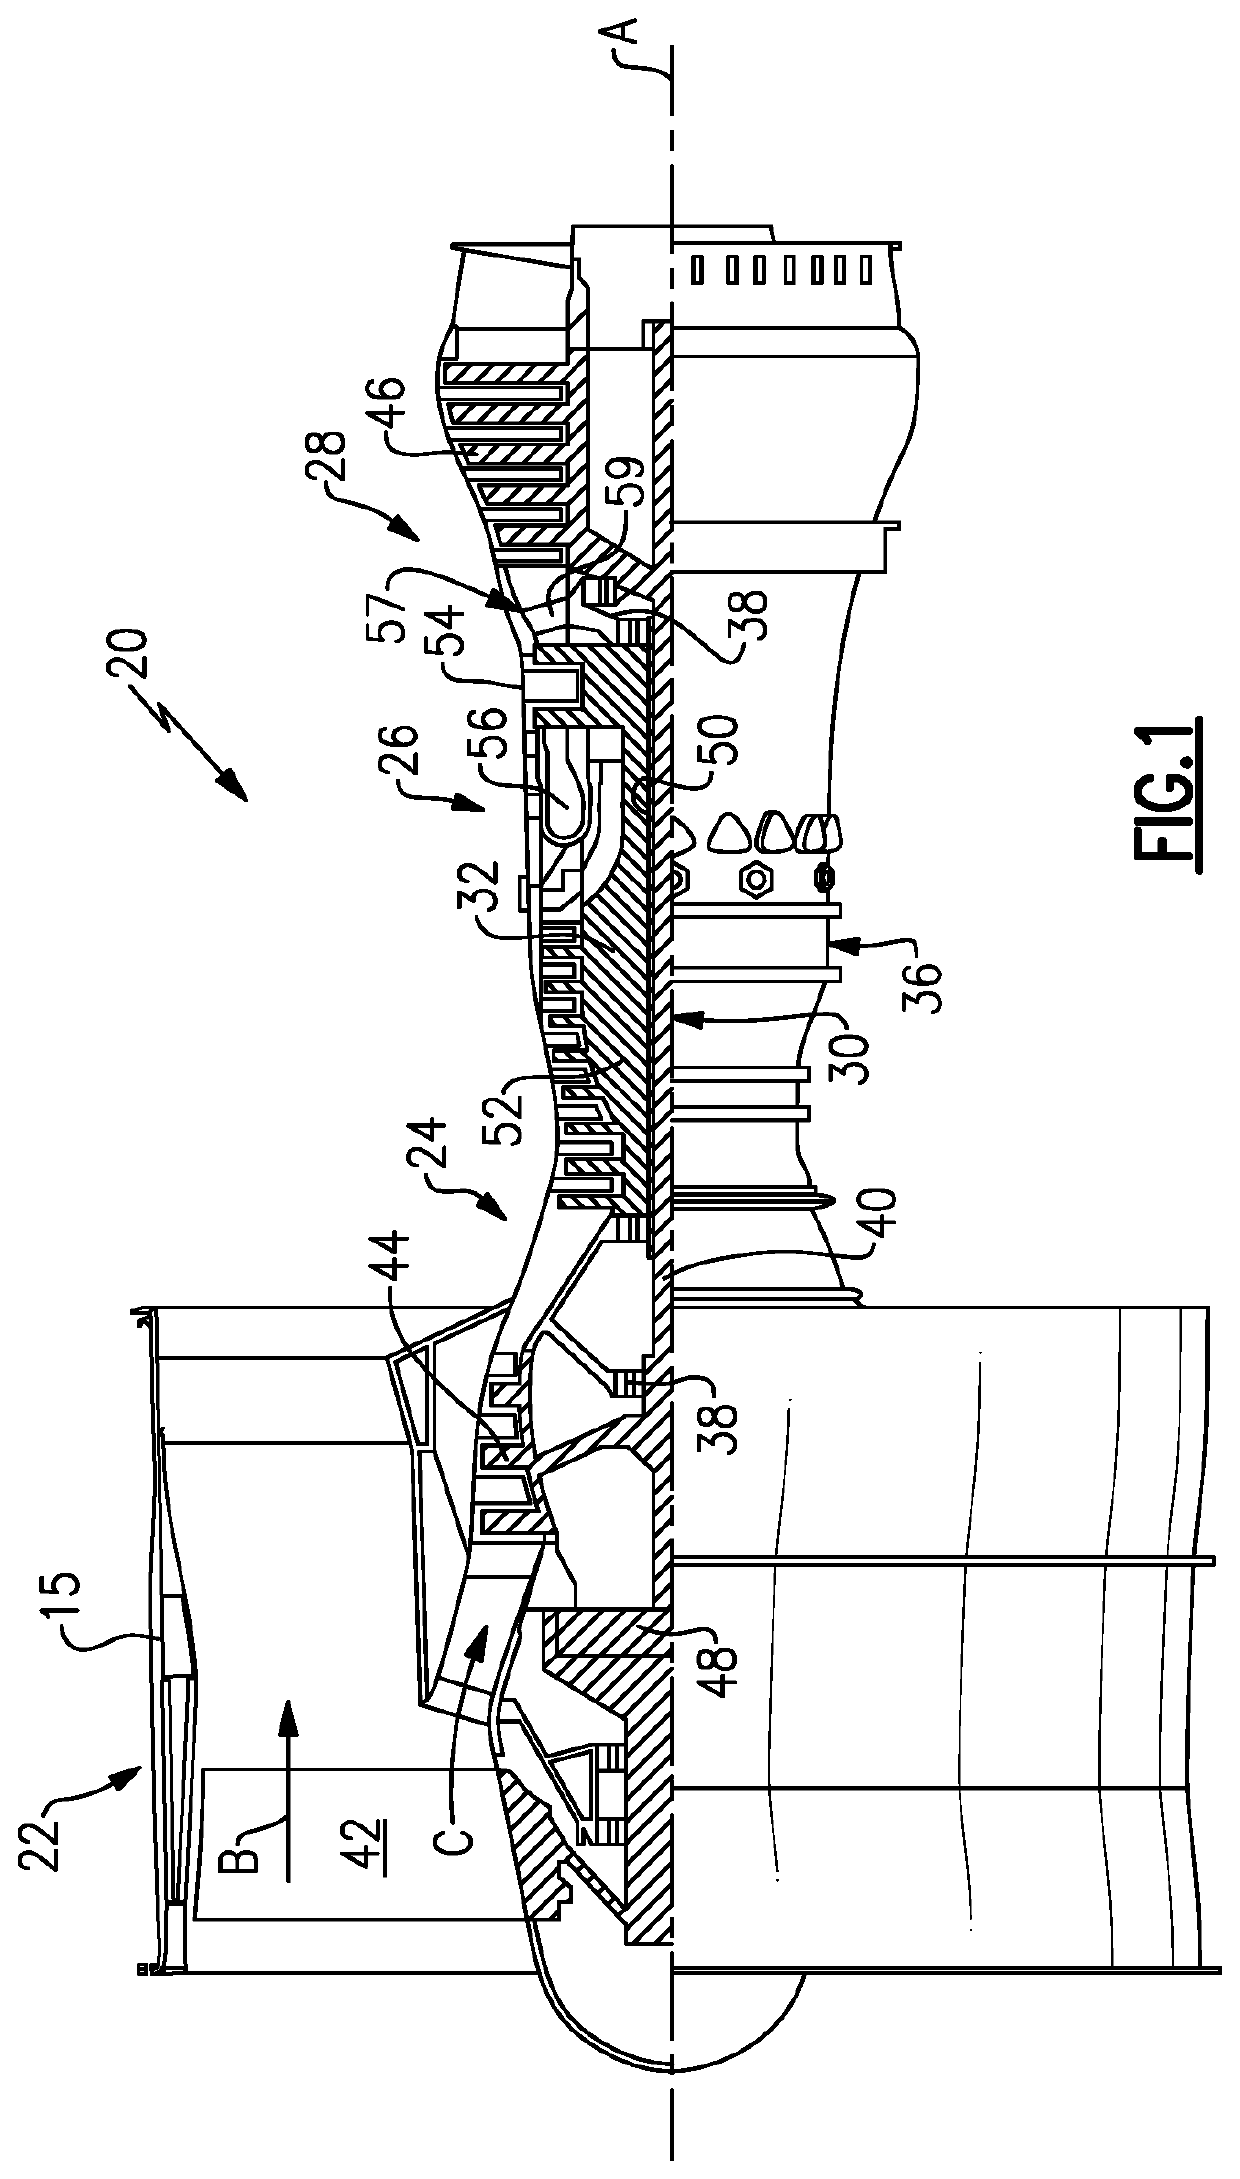 Work recovery system for a gas turbine engine utilizing an overexpanded, recuperated supercritical co2 bottoming cycle